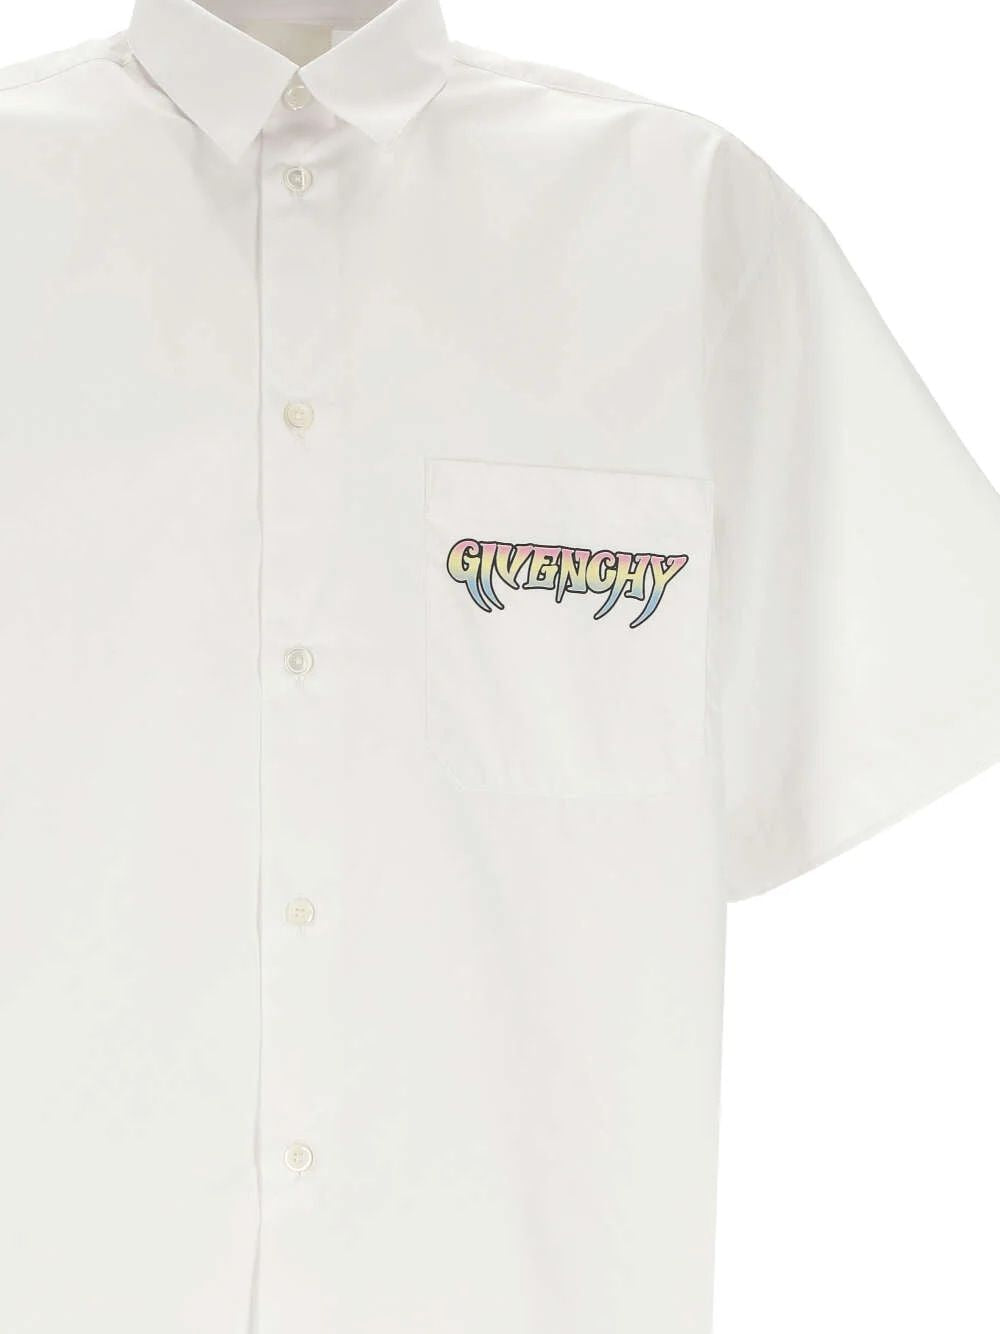 GIVENCHY Summertime Printed Shirt for Men